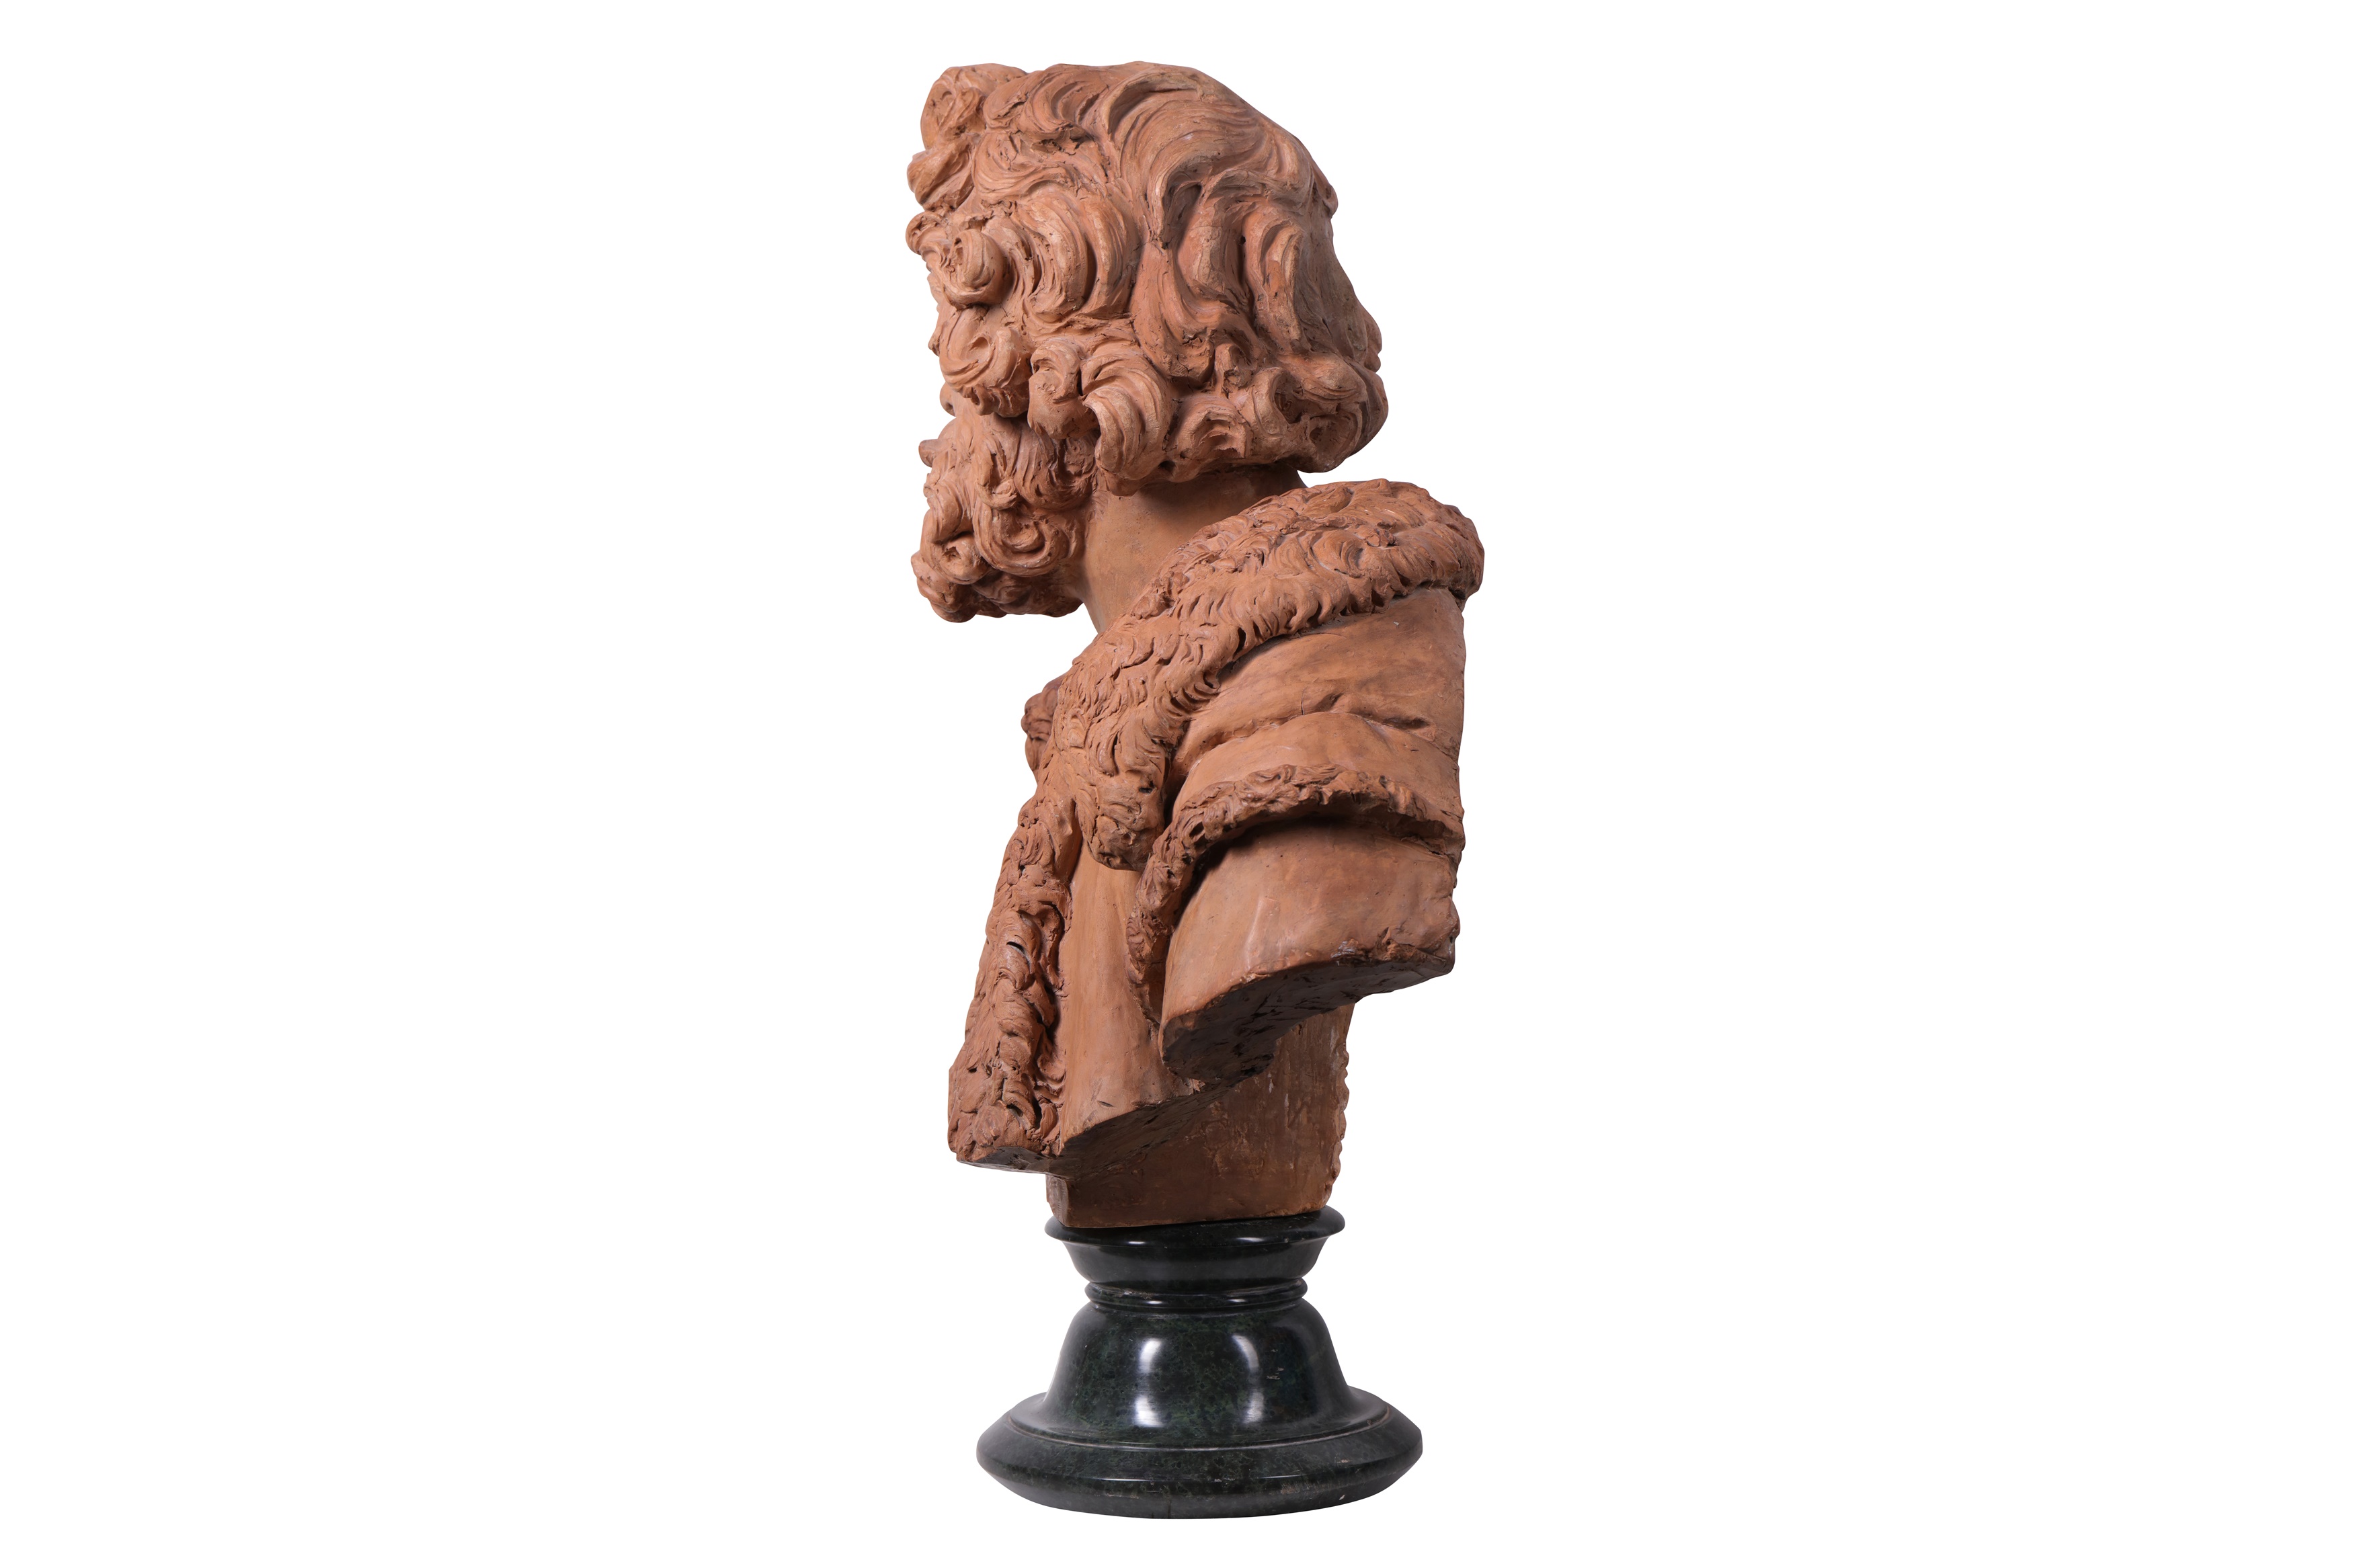 A LATE 17TH / EARLY 18TH CENTURY SOUTH NETHERLANDISH TERRACOTTA BUST OF A BEARDED MAN - Image 4 of 4